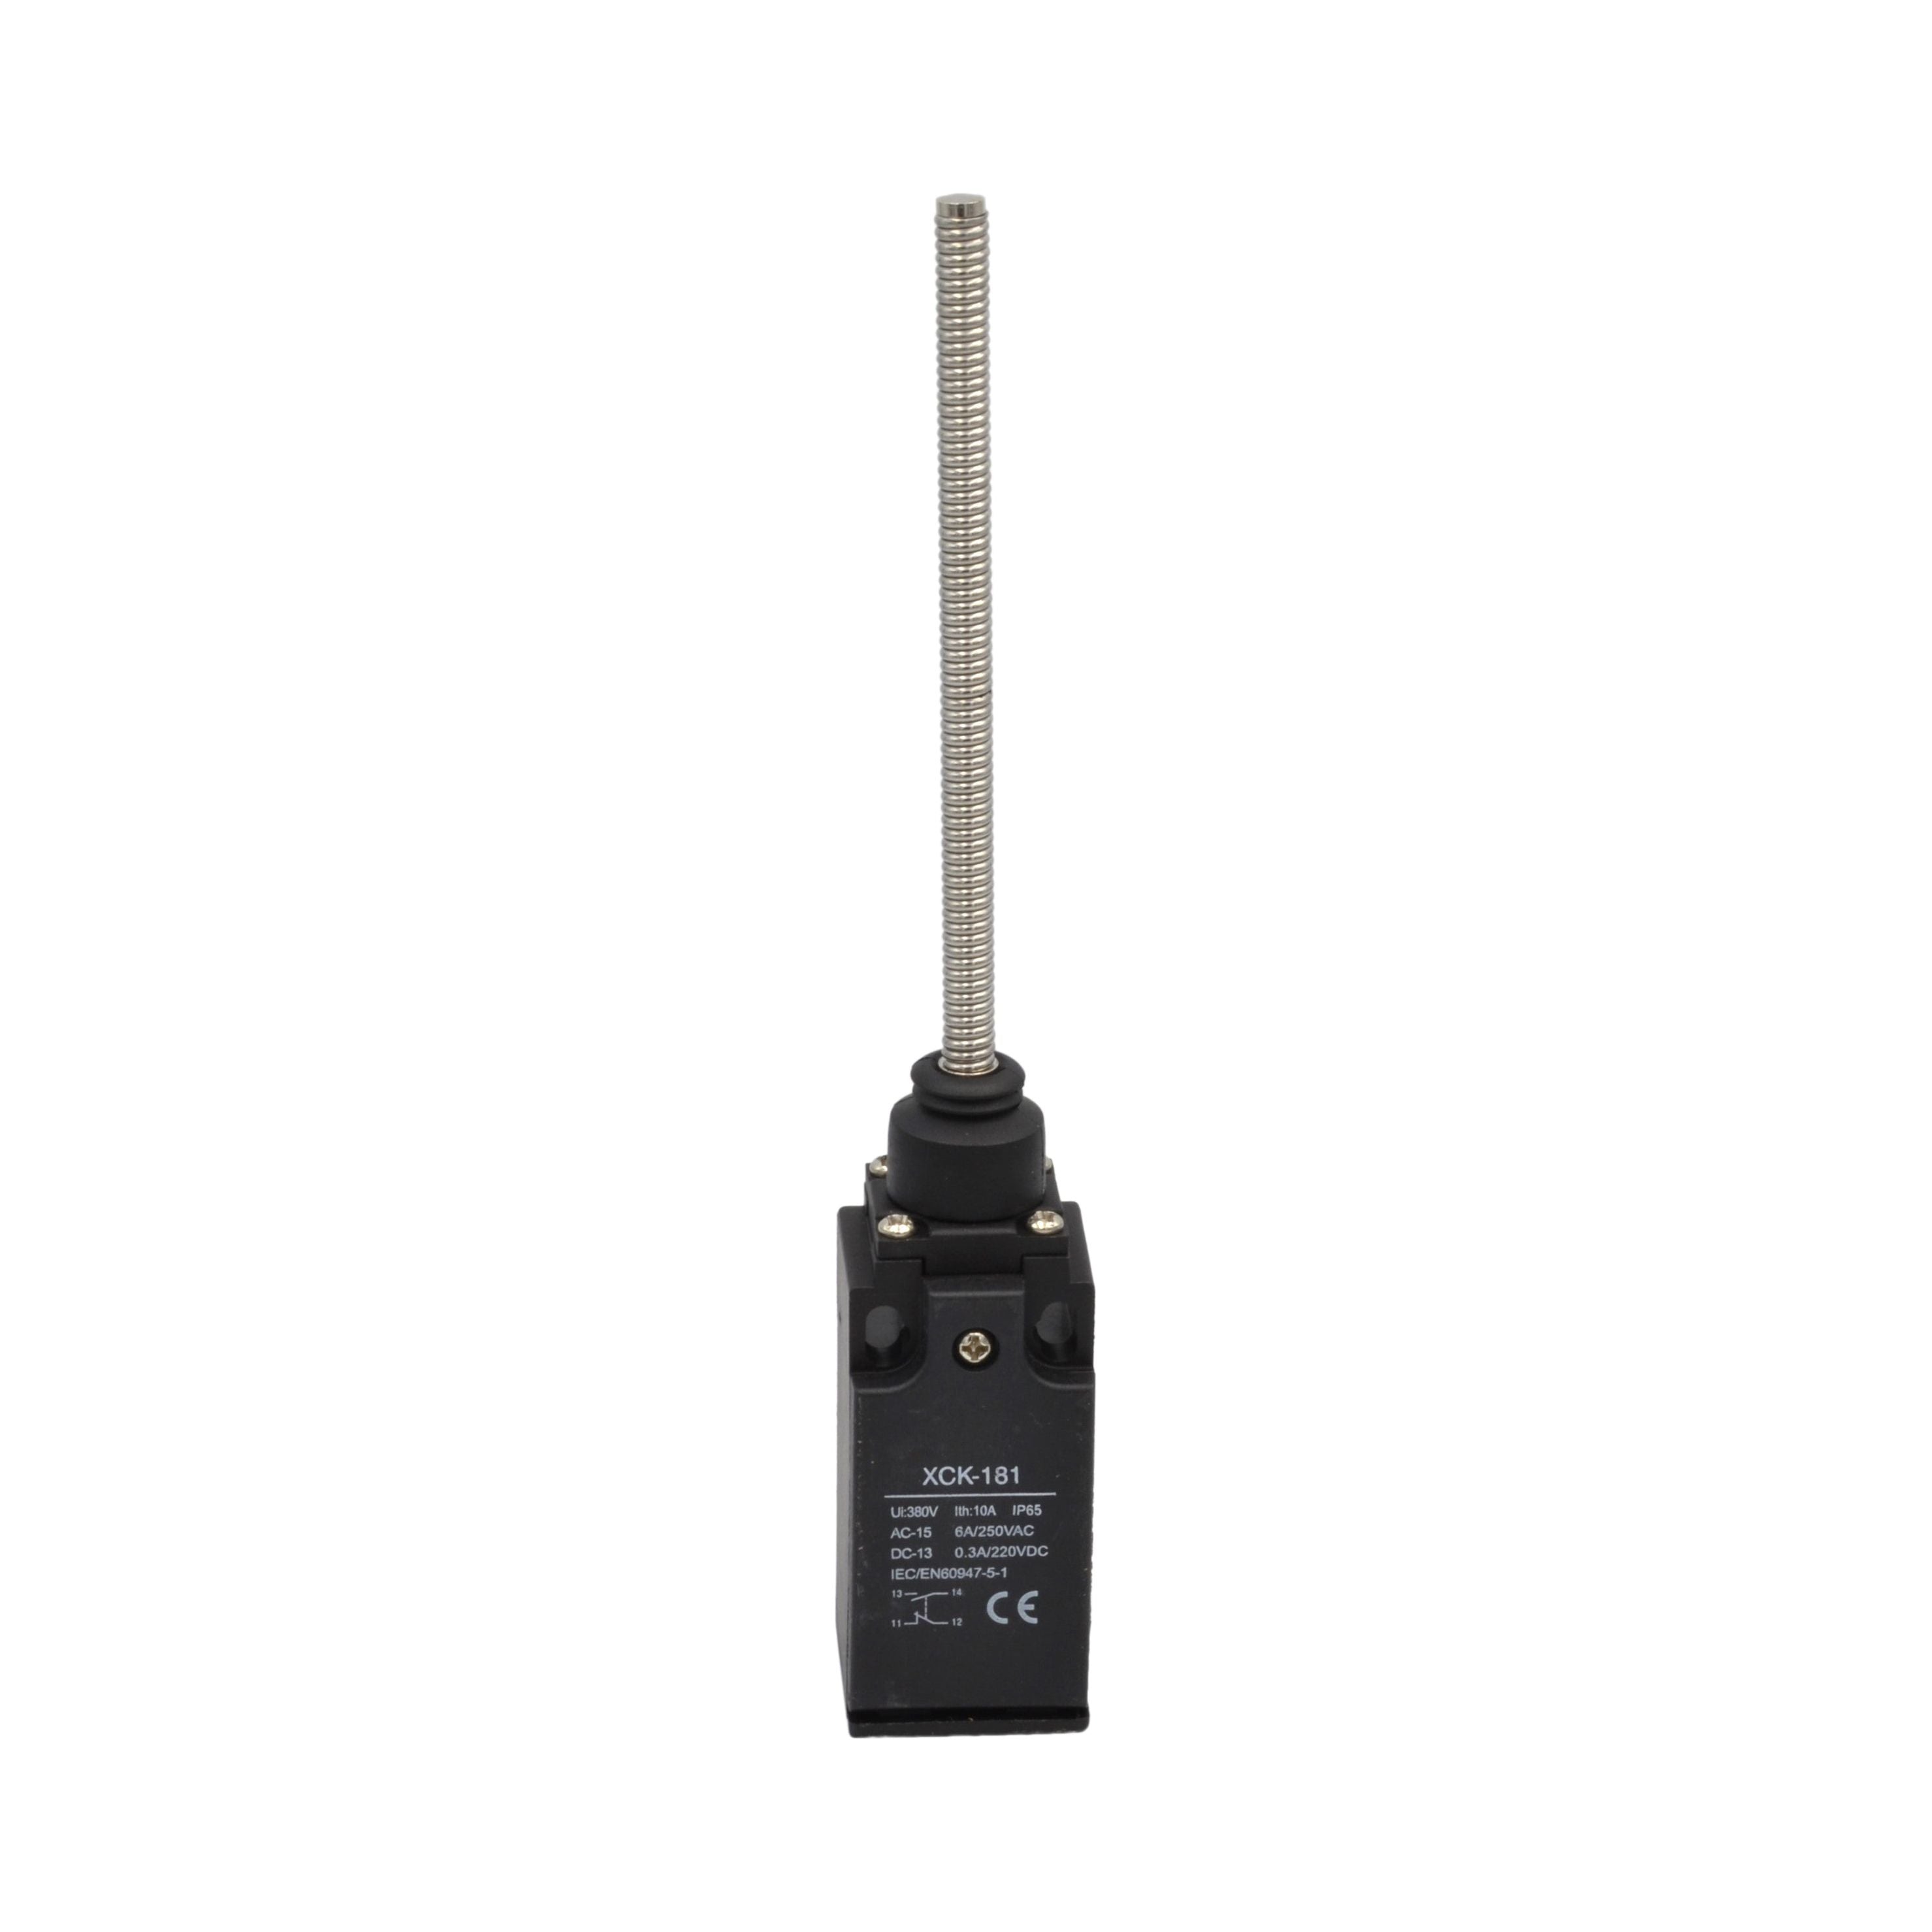 XCK-181 Coil Spring Actuator Momentary Limit Switch